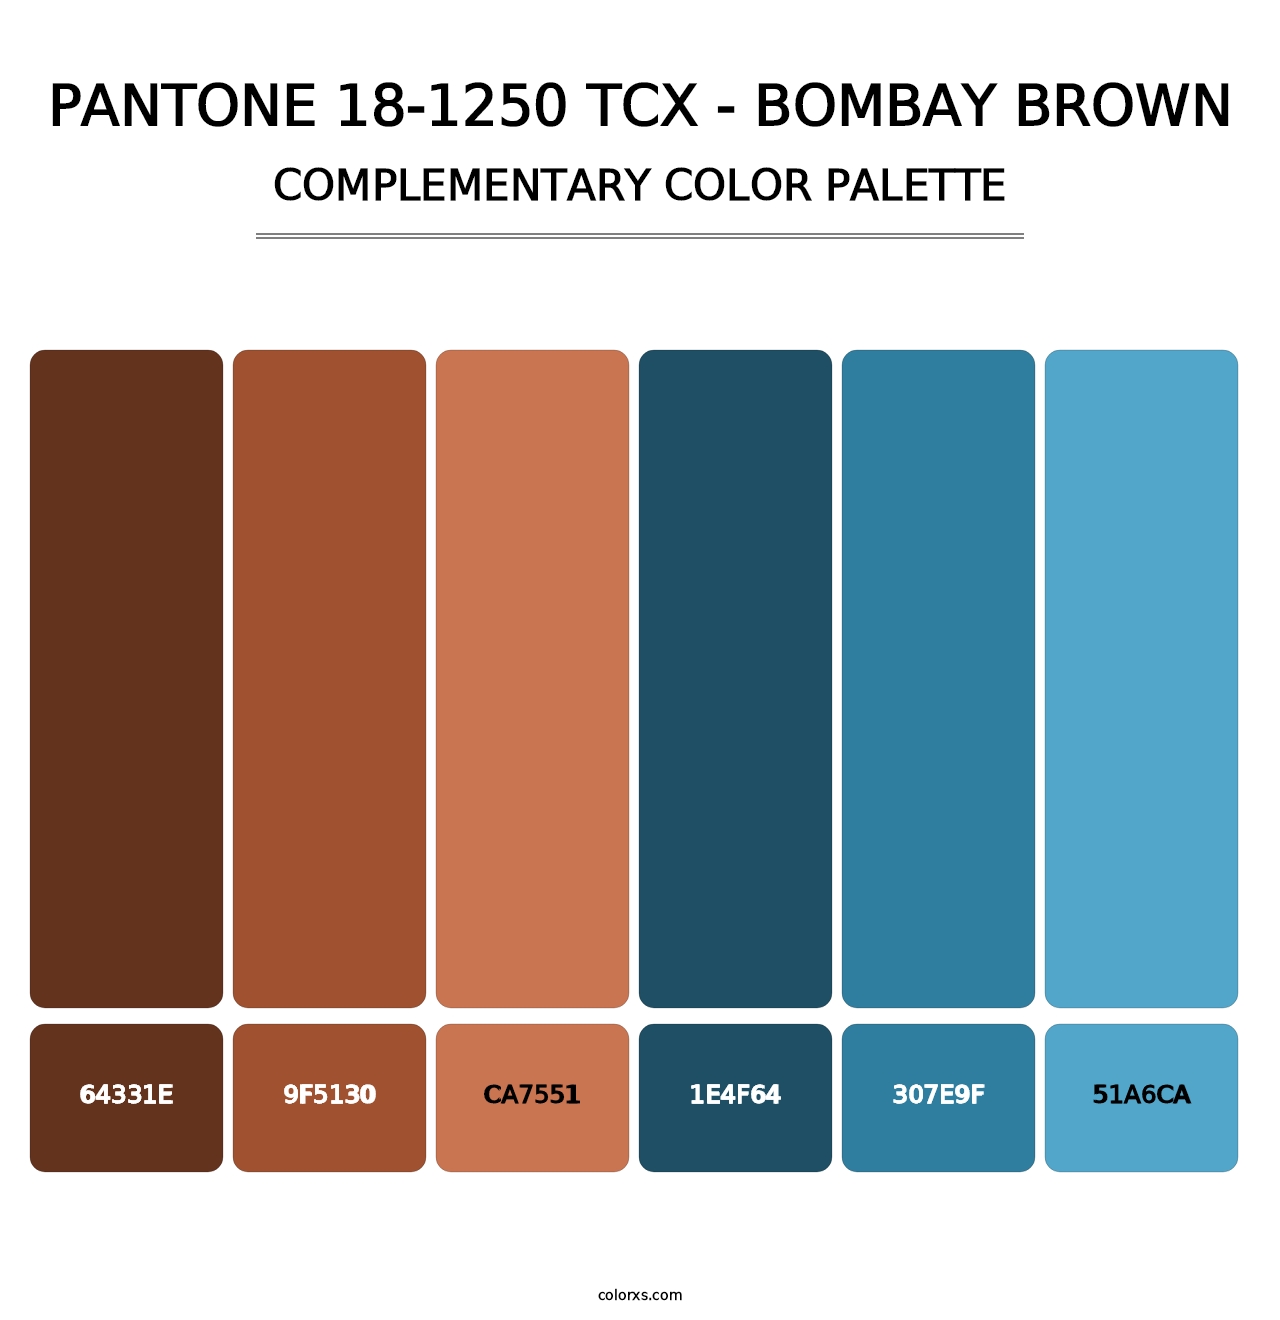 PANTONE 18-1250 TCX - Bombay Brown - Complementary Color Palette